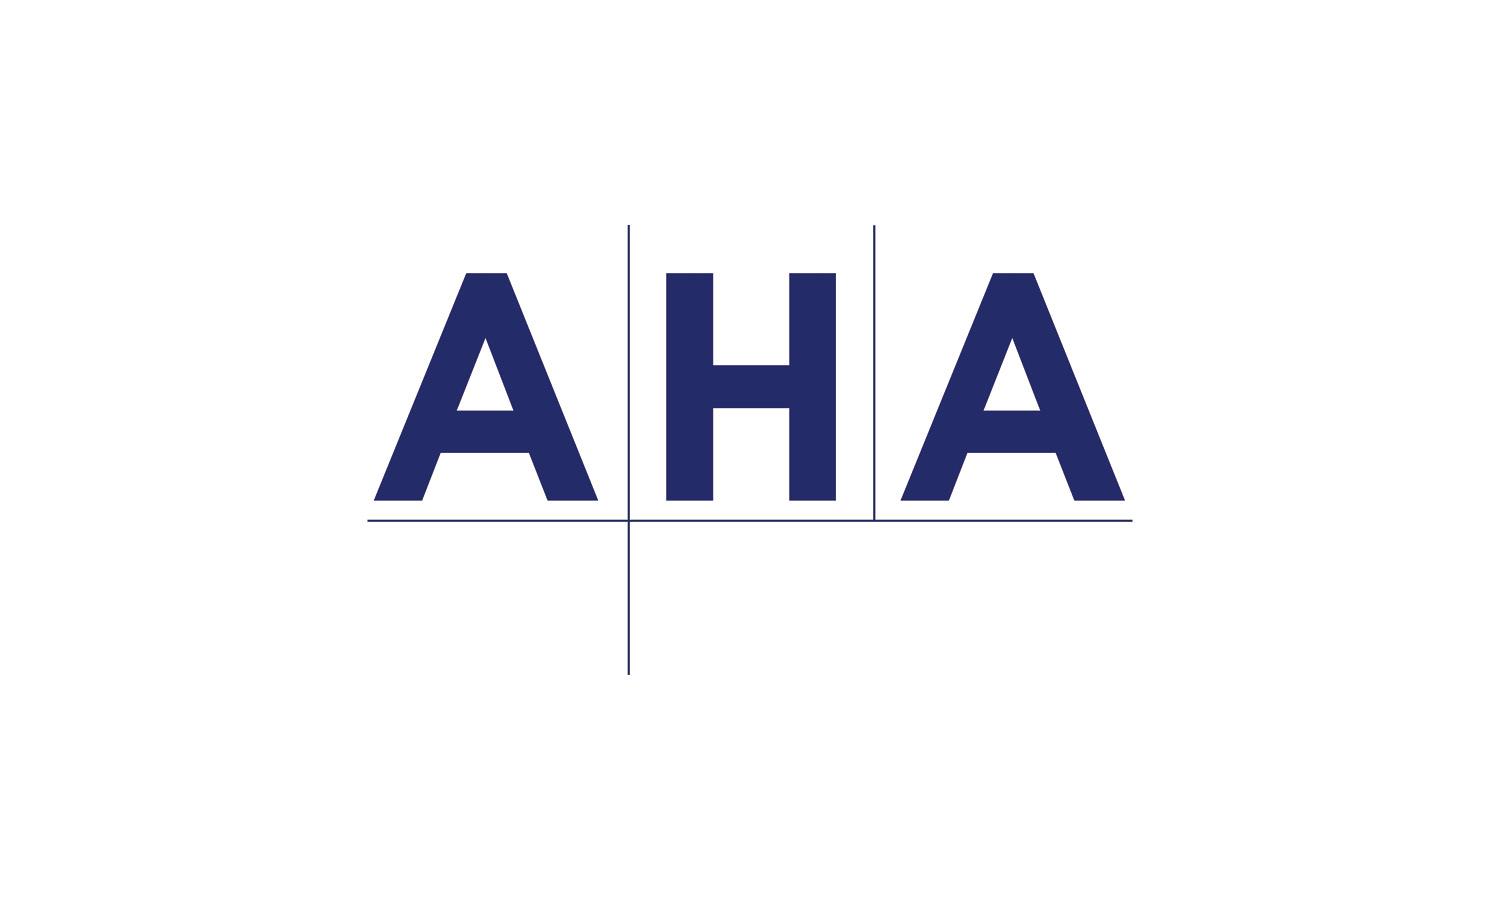 AHA Consulting Engineers